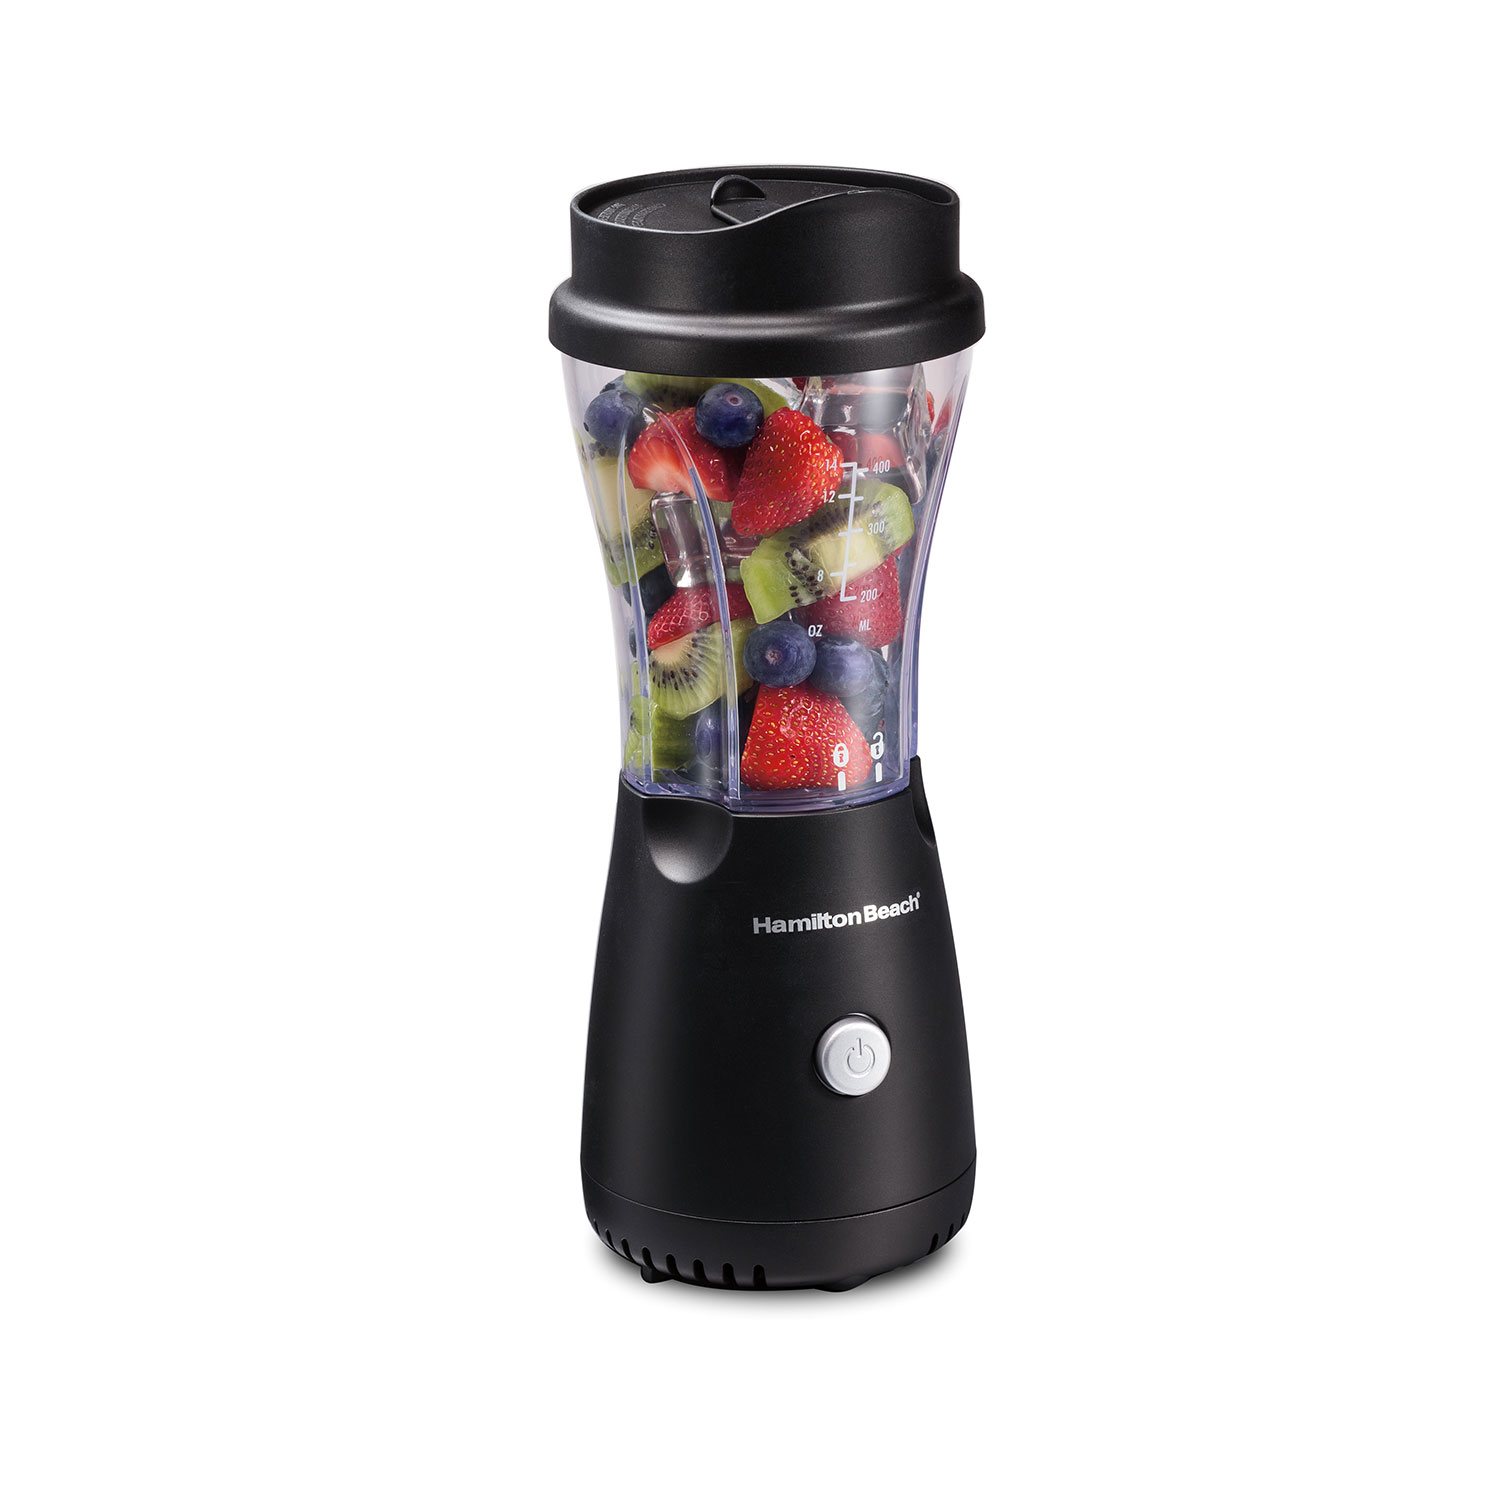 Personal Creations™ Blender with Travel Lid (51146G)